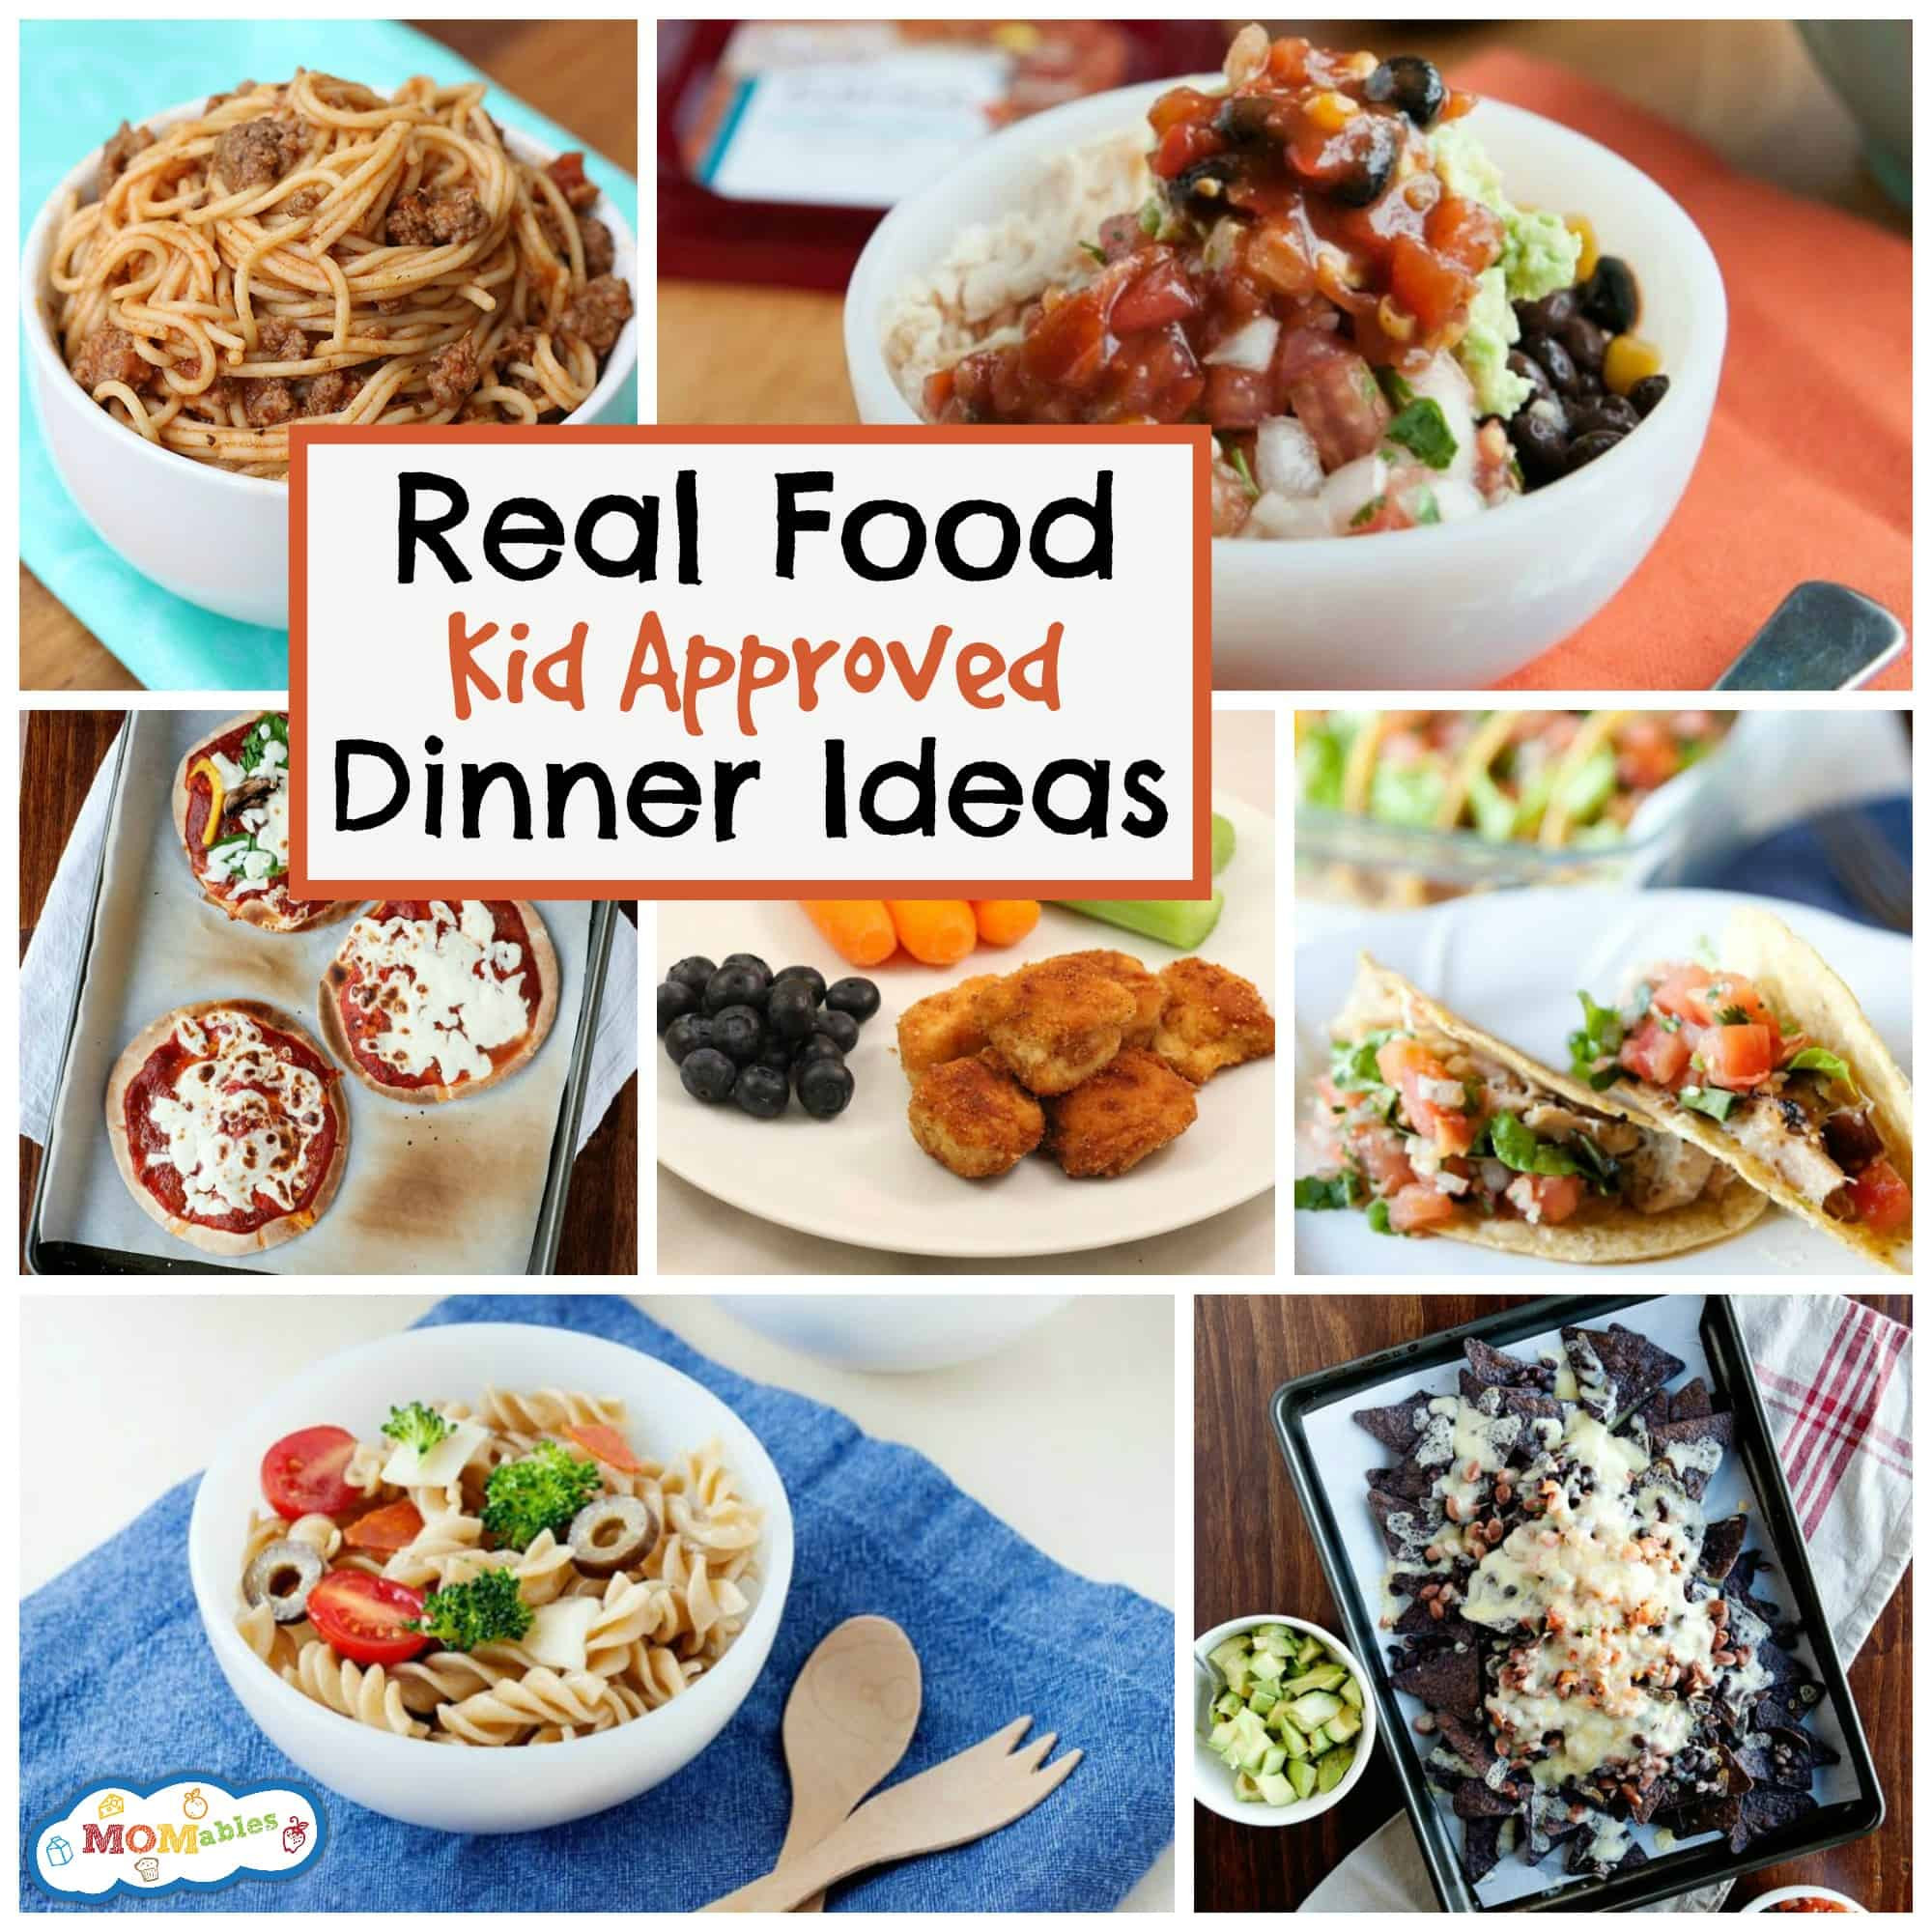 Easy Kids Dinner Recipes
 Dinner Ideas for Kids the Best Real Food Recipes